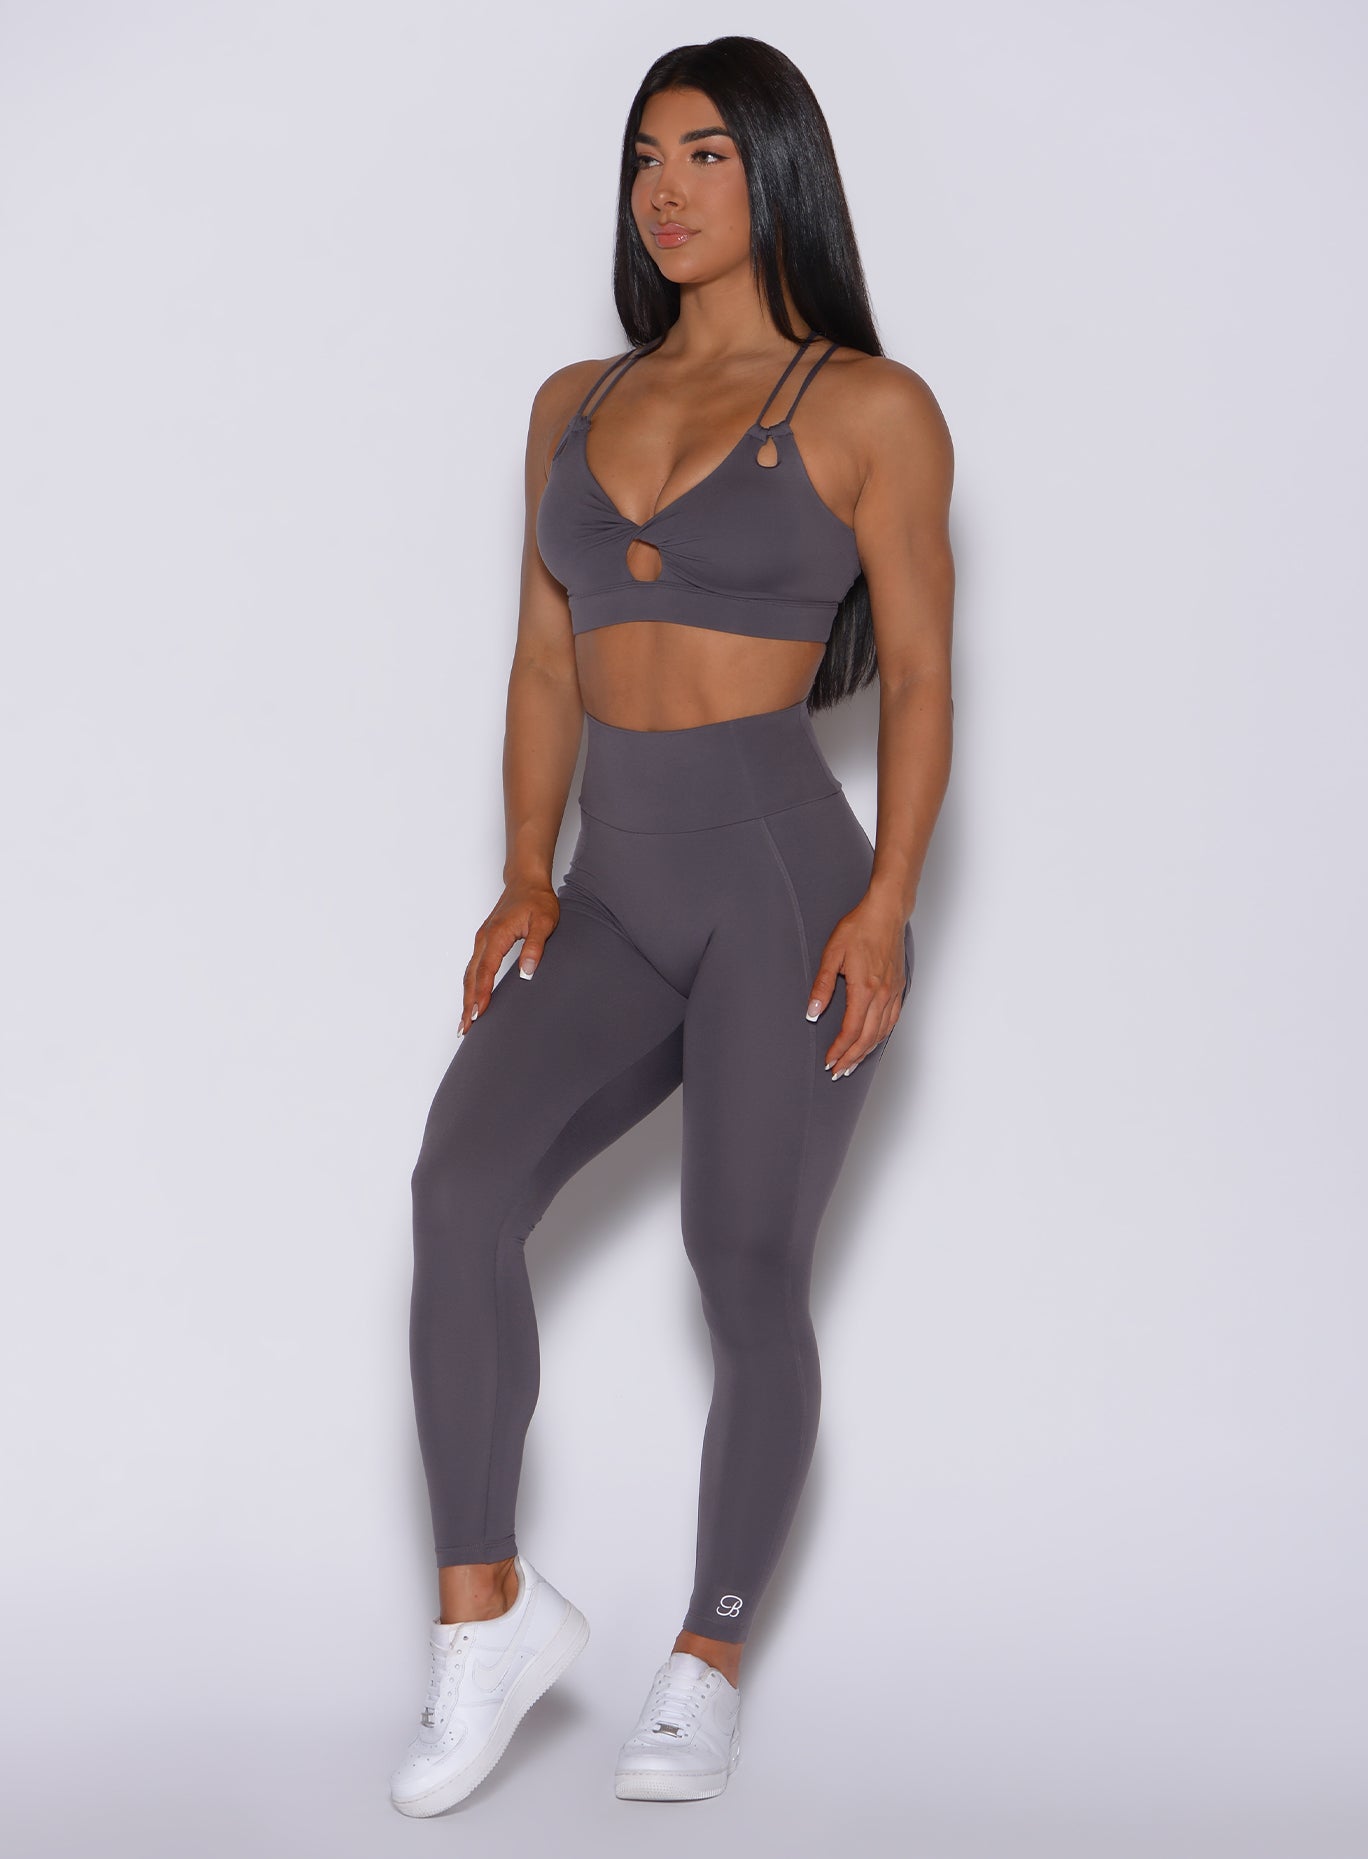 Front profile view of a model angled slightly to her right wearing our new and enhanced shape leggings in gray smoke color and a matching bra